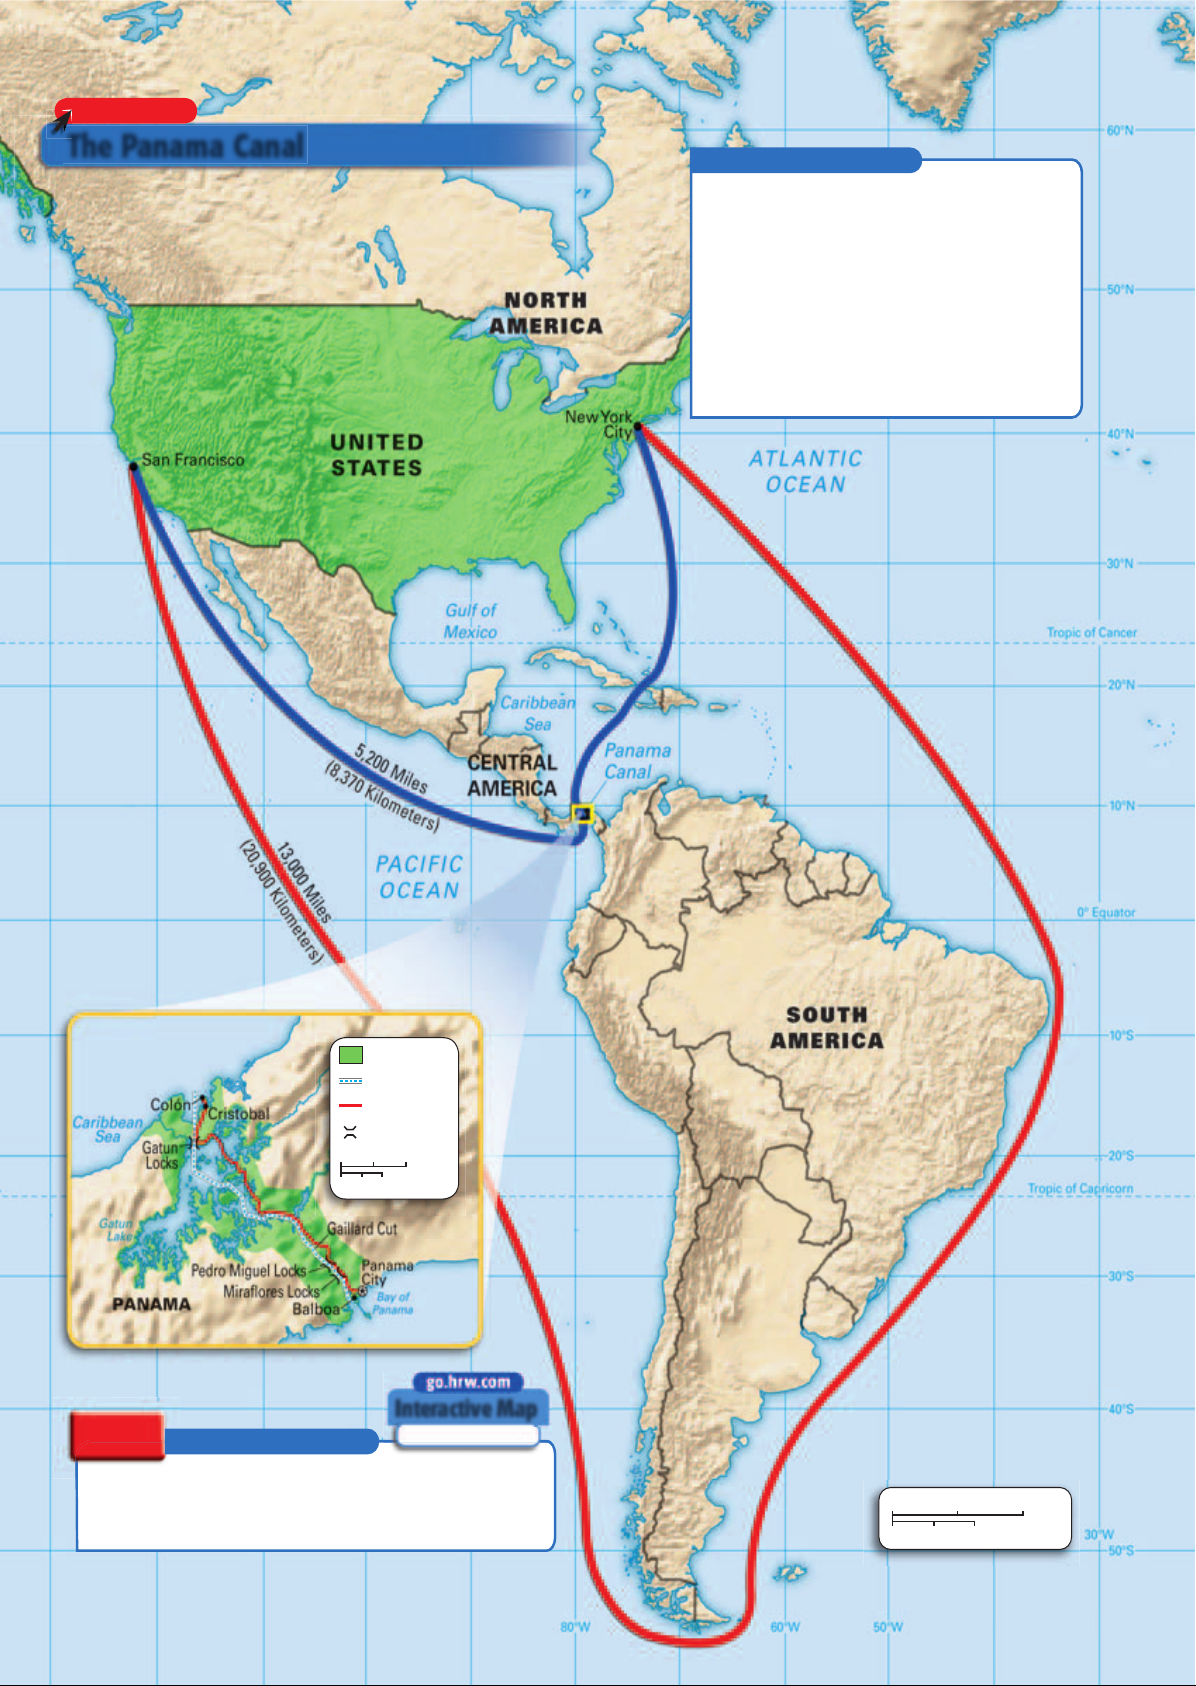 US_History_Textbook_8th_Grade_Chapter_20_America_Becomes_a_World_Power_80yTbPu Image-16